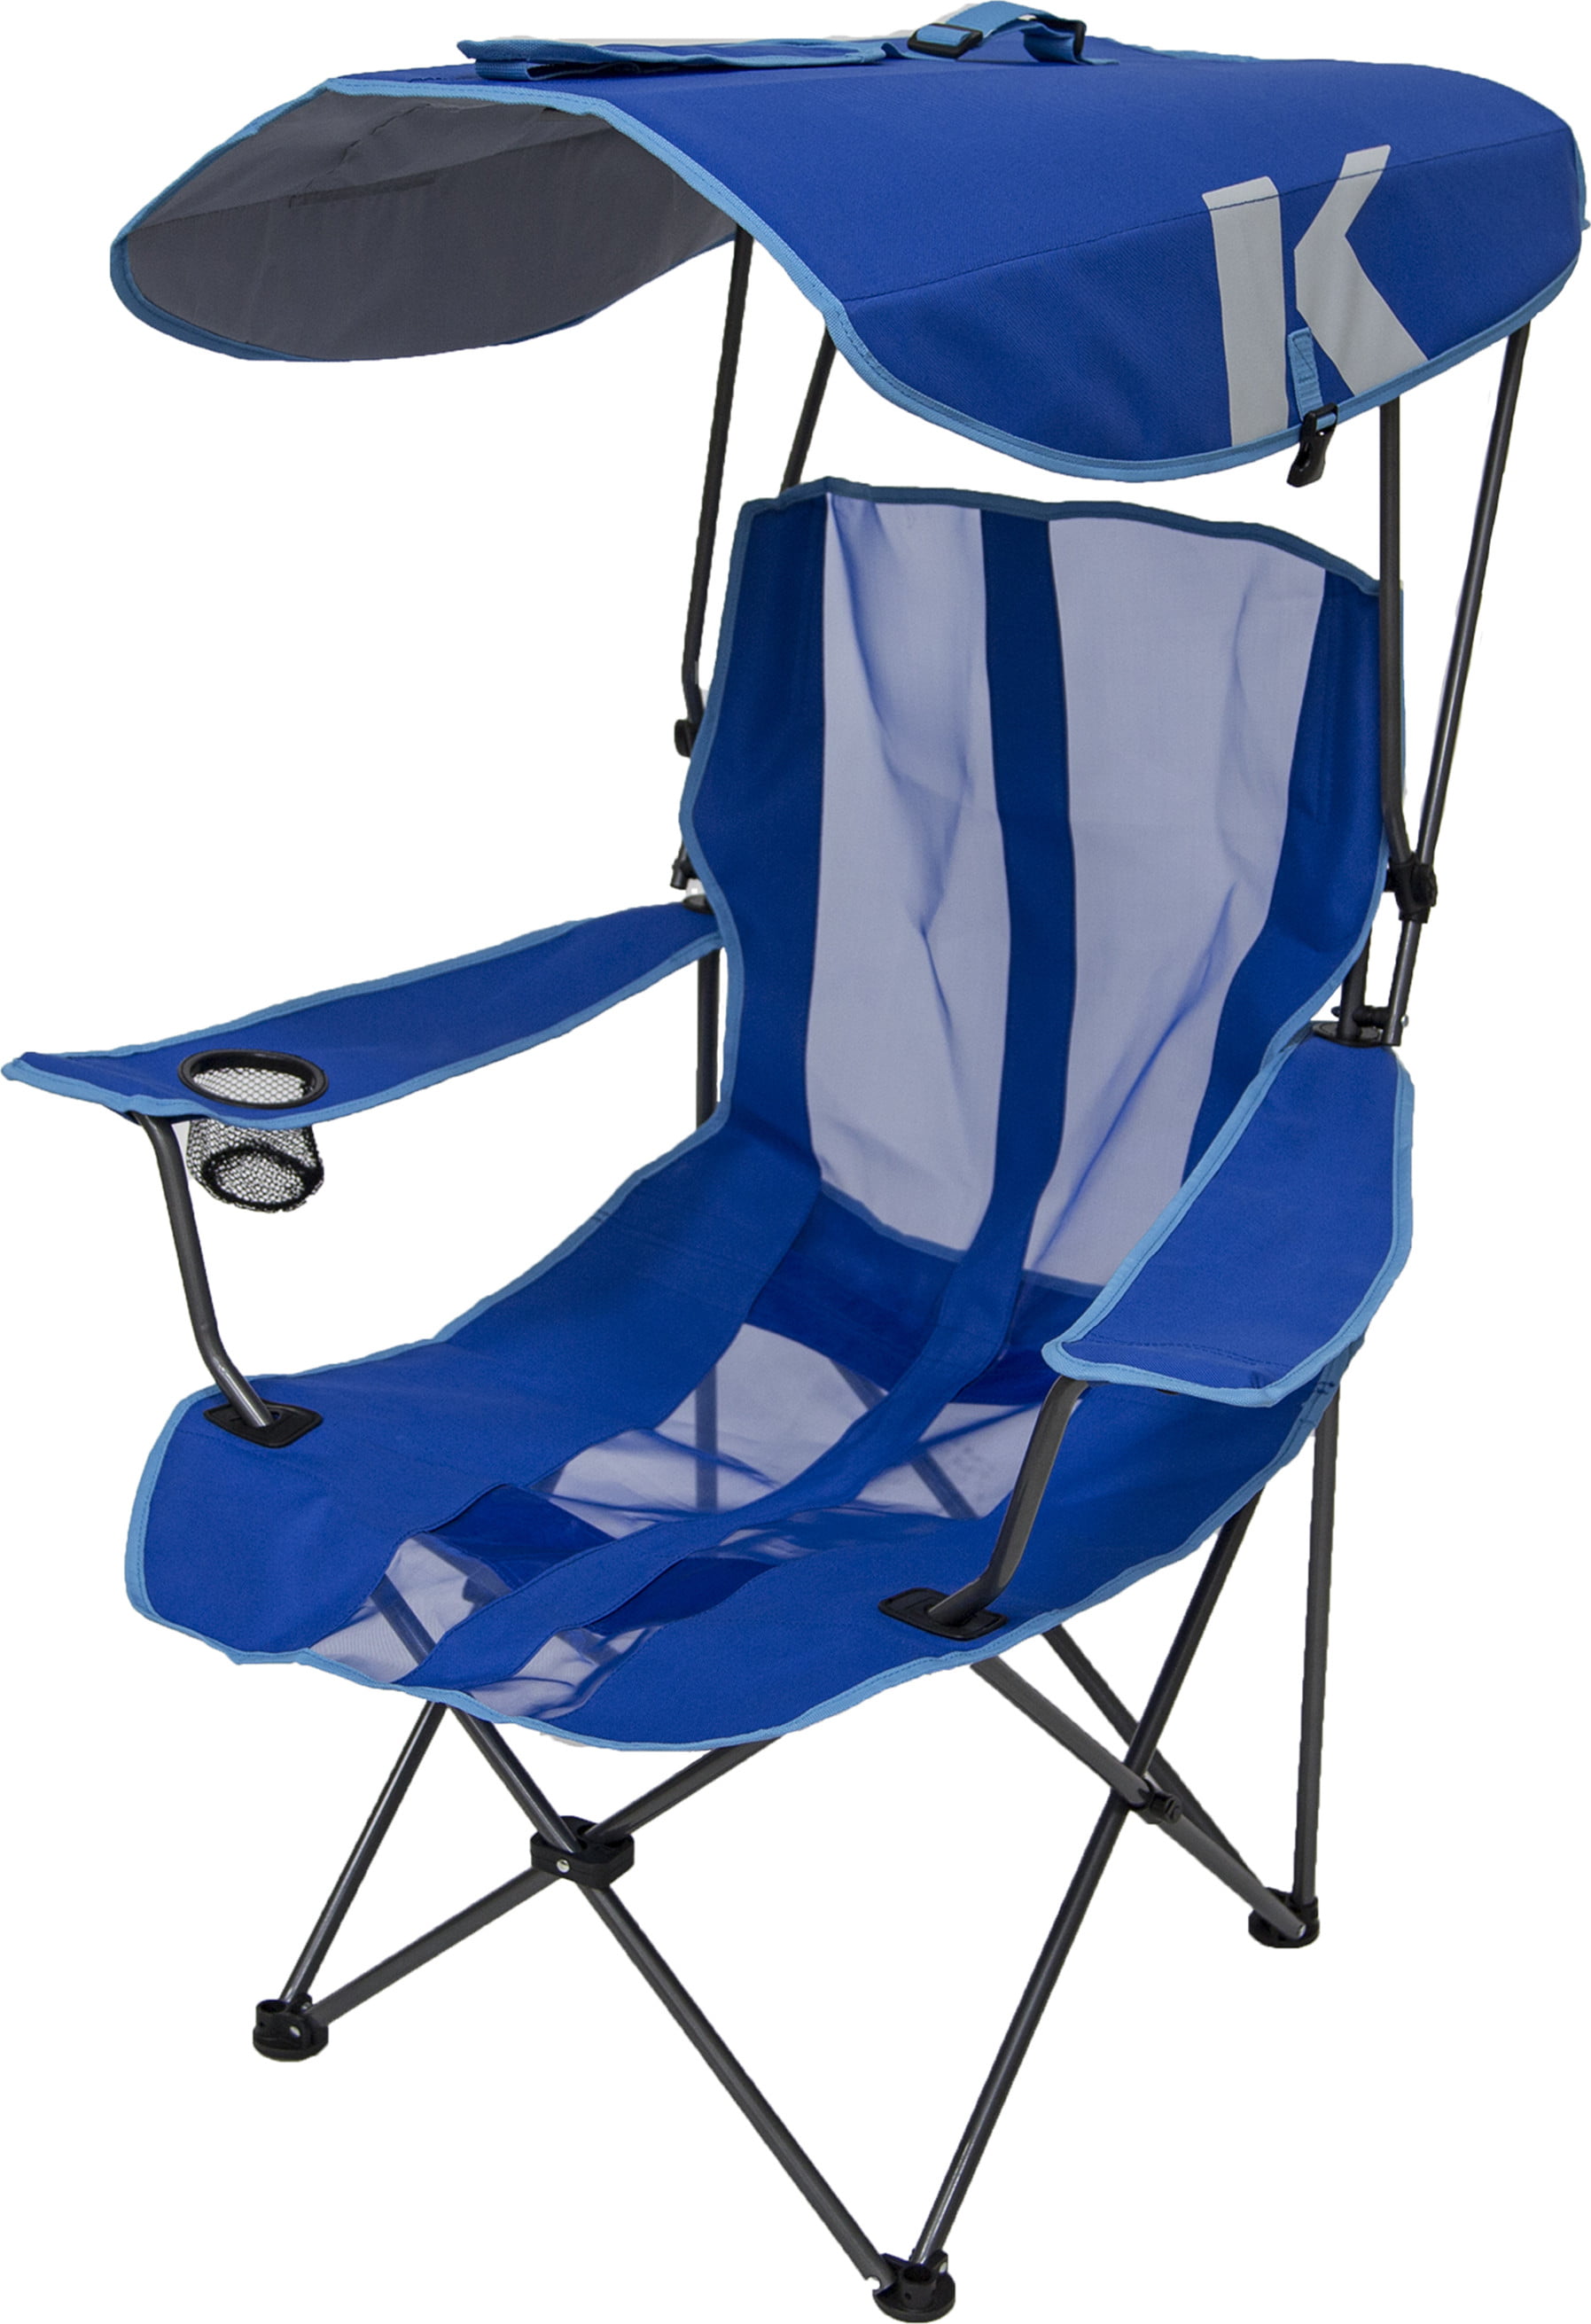 Kelsyus Original Canopy Chair, Portable Camping Chair With Canopy